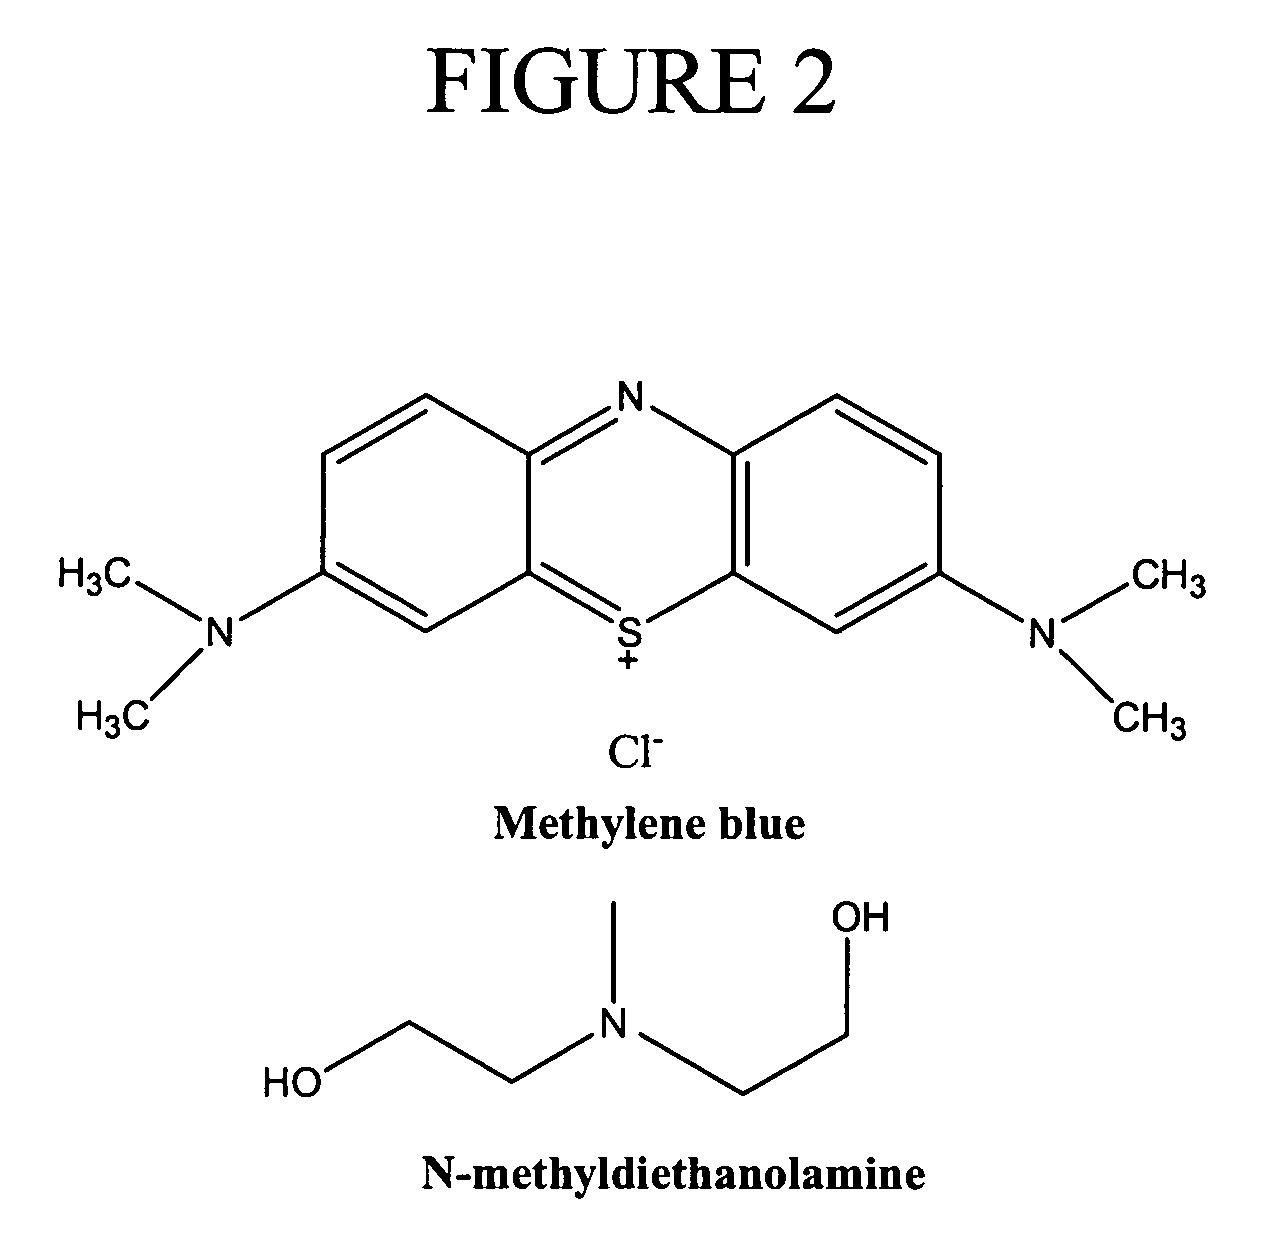 Method for producing polymers with controlled molecular weight and end group functionality using photopolymerization in microemulsions